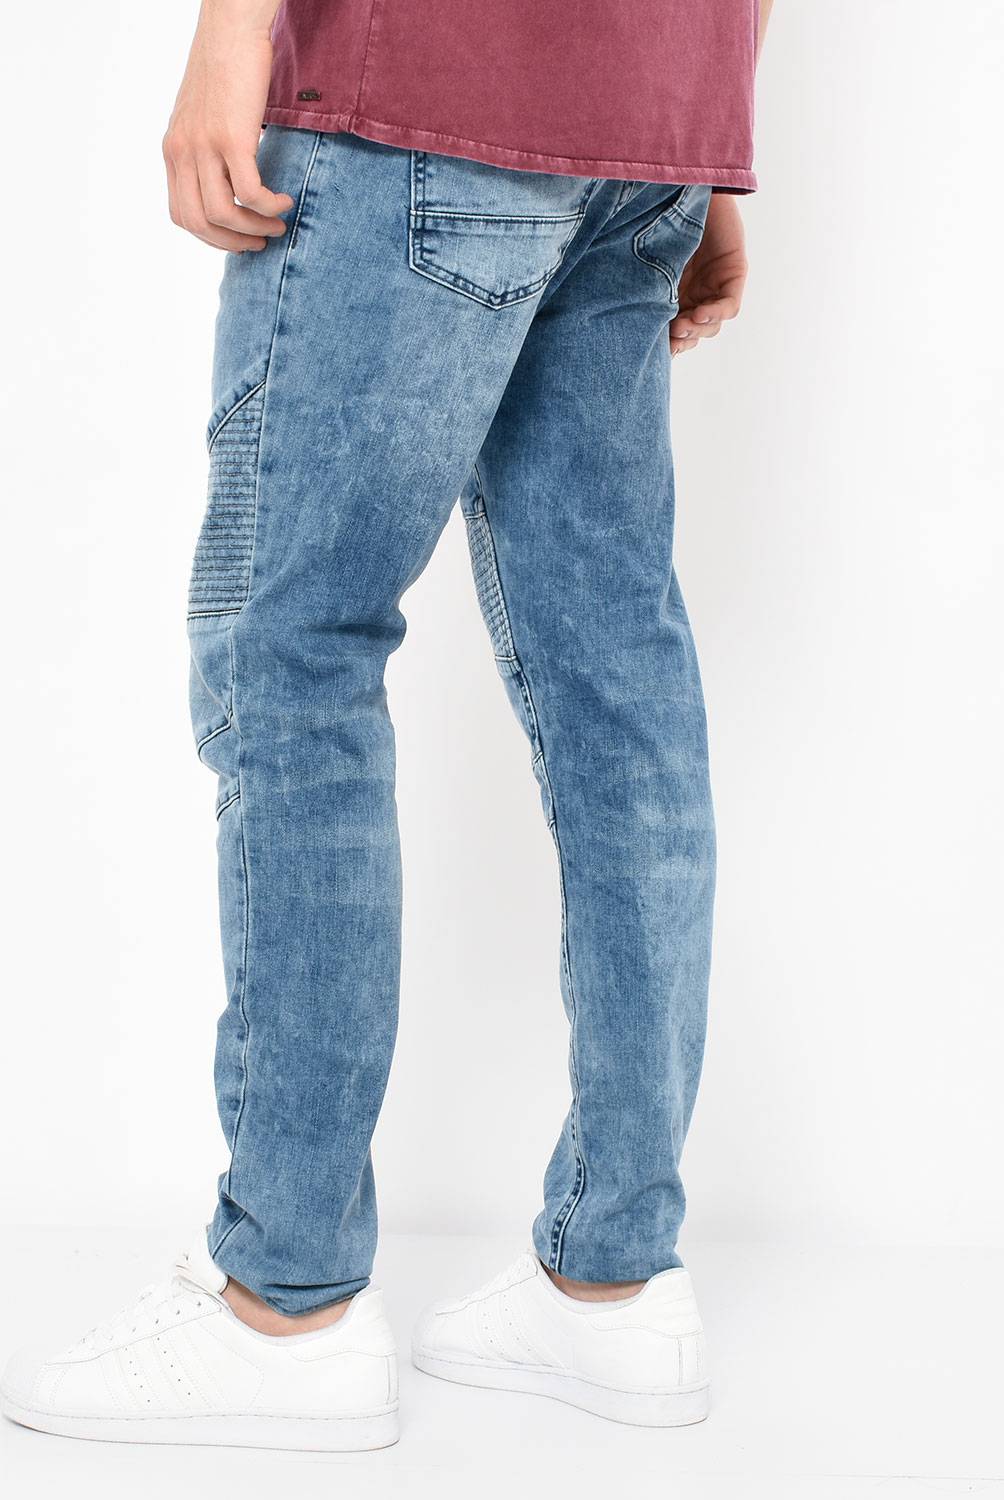 MOSSIMO - Jeans